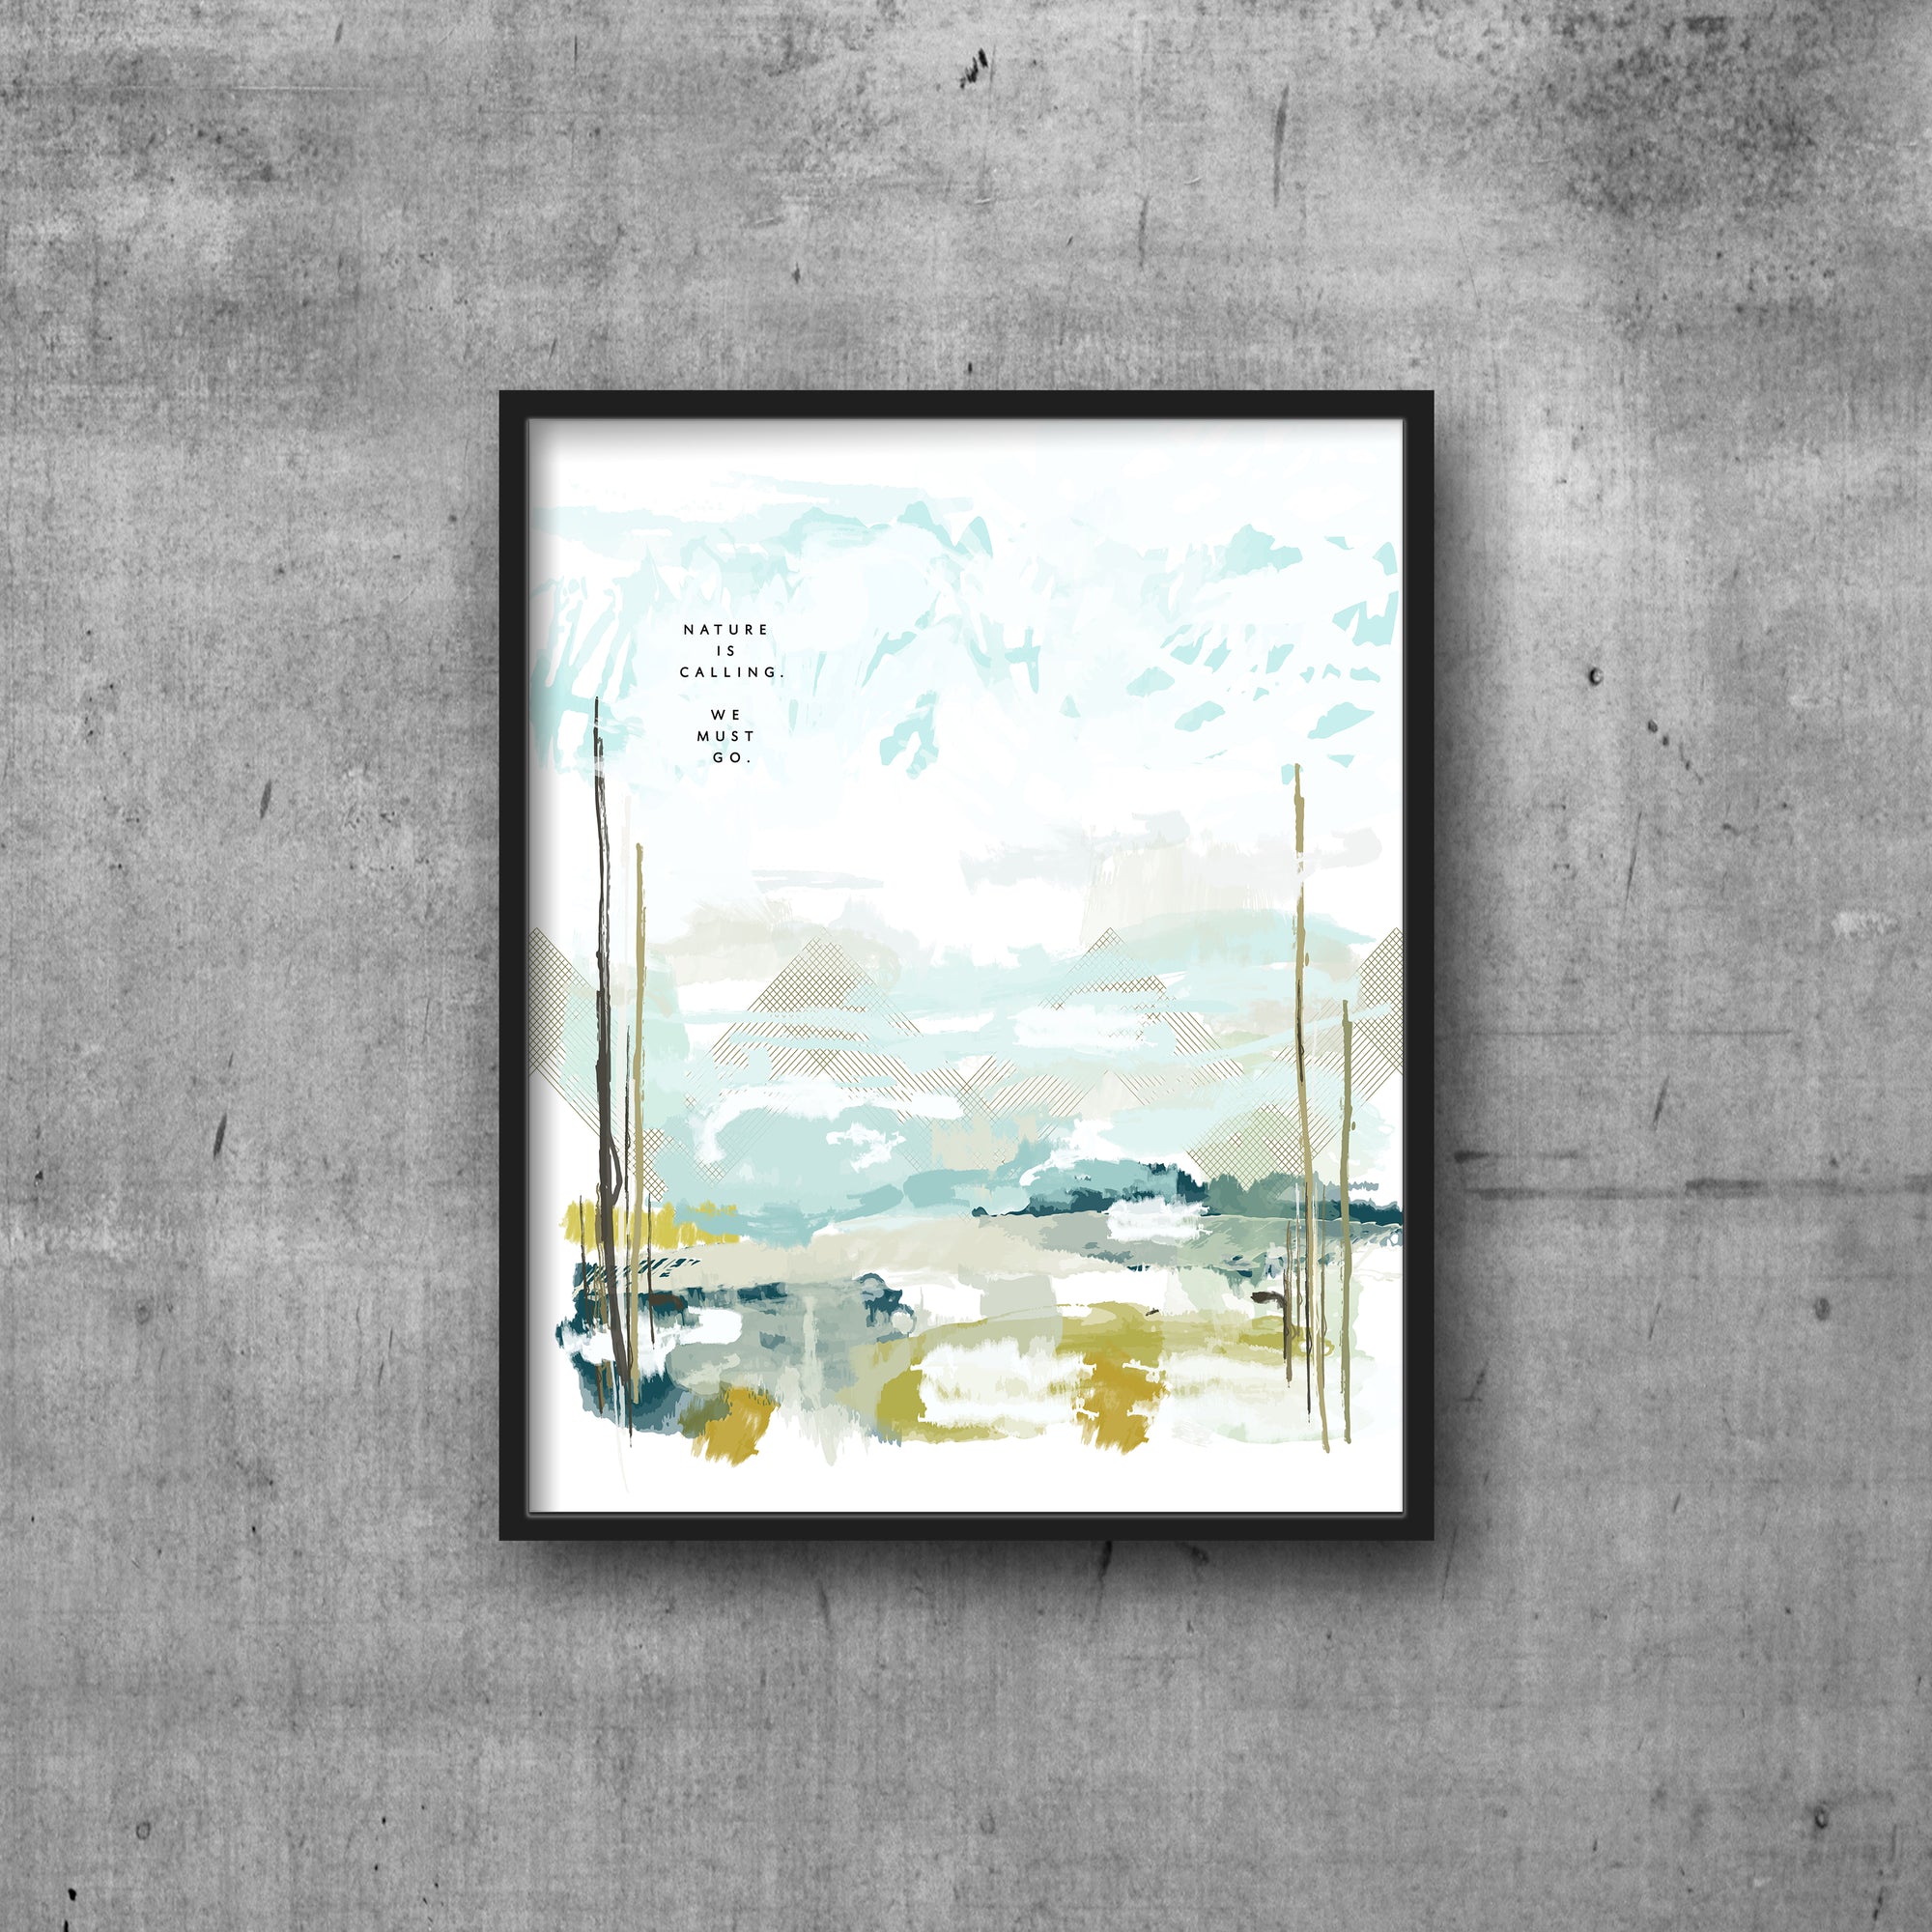 ART PRINT FEATURING NATURE SCENE WITH MOUNTAINS AND THE TEXT NATURE IS CALLIING, WE MUST GO. SHOWN IN BLACK FRAME.